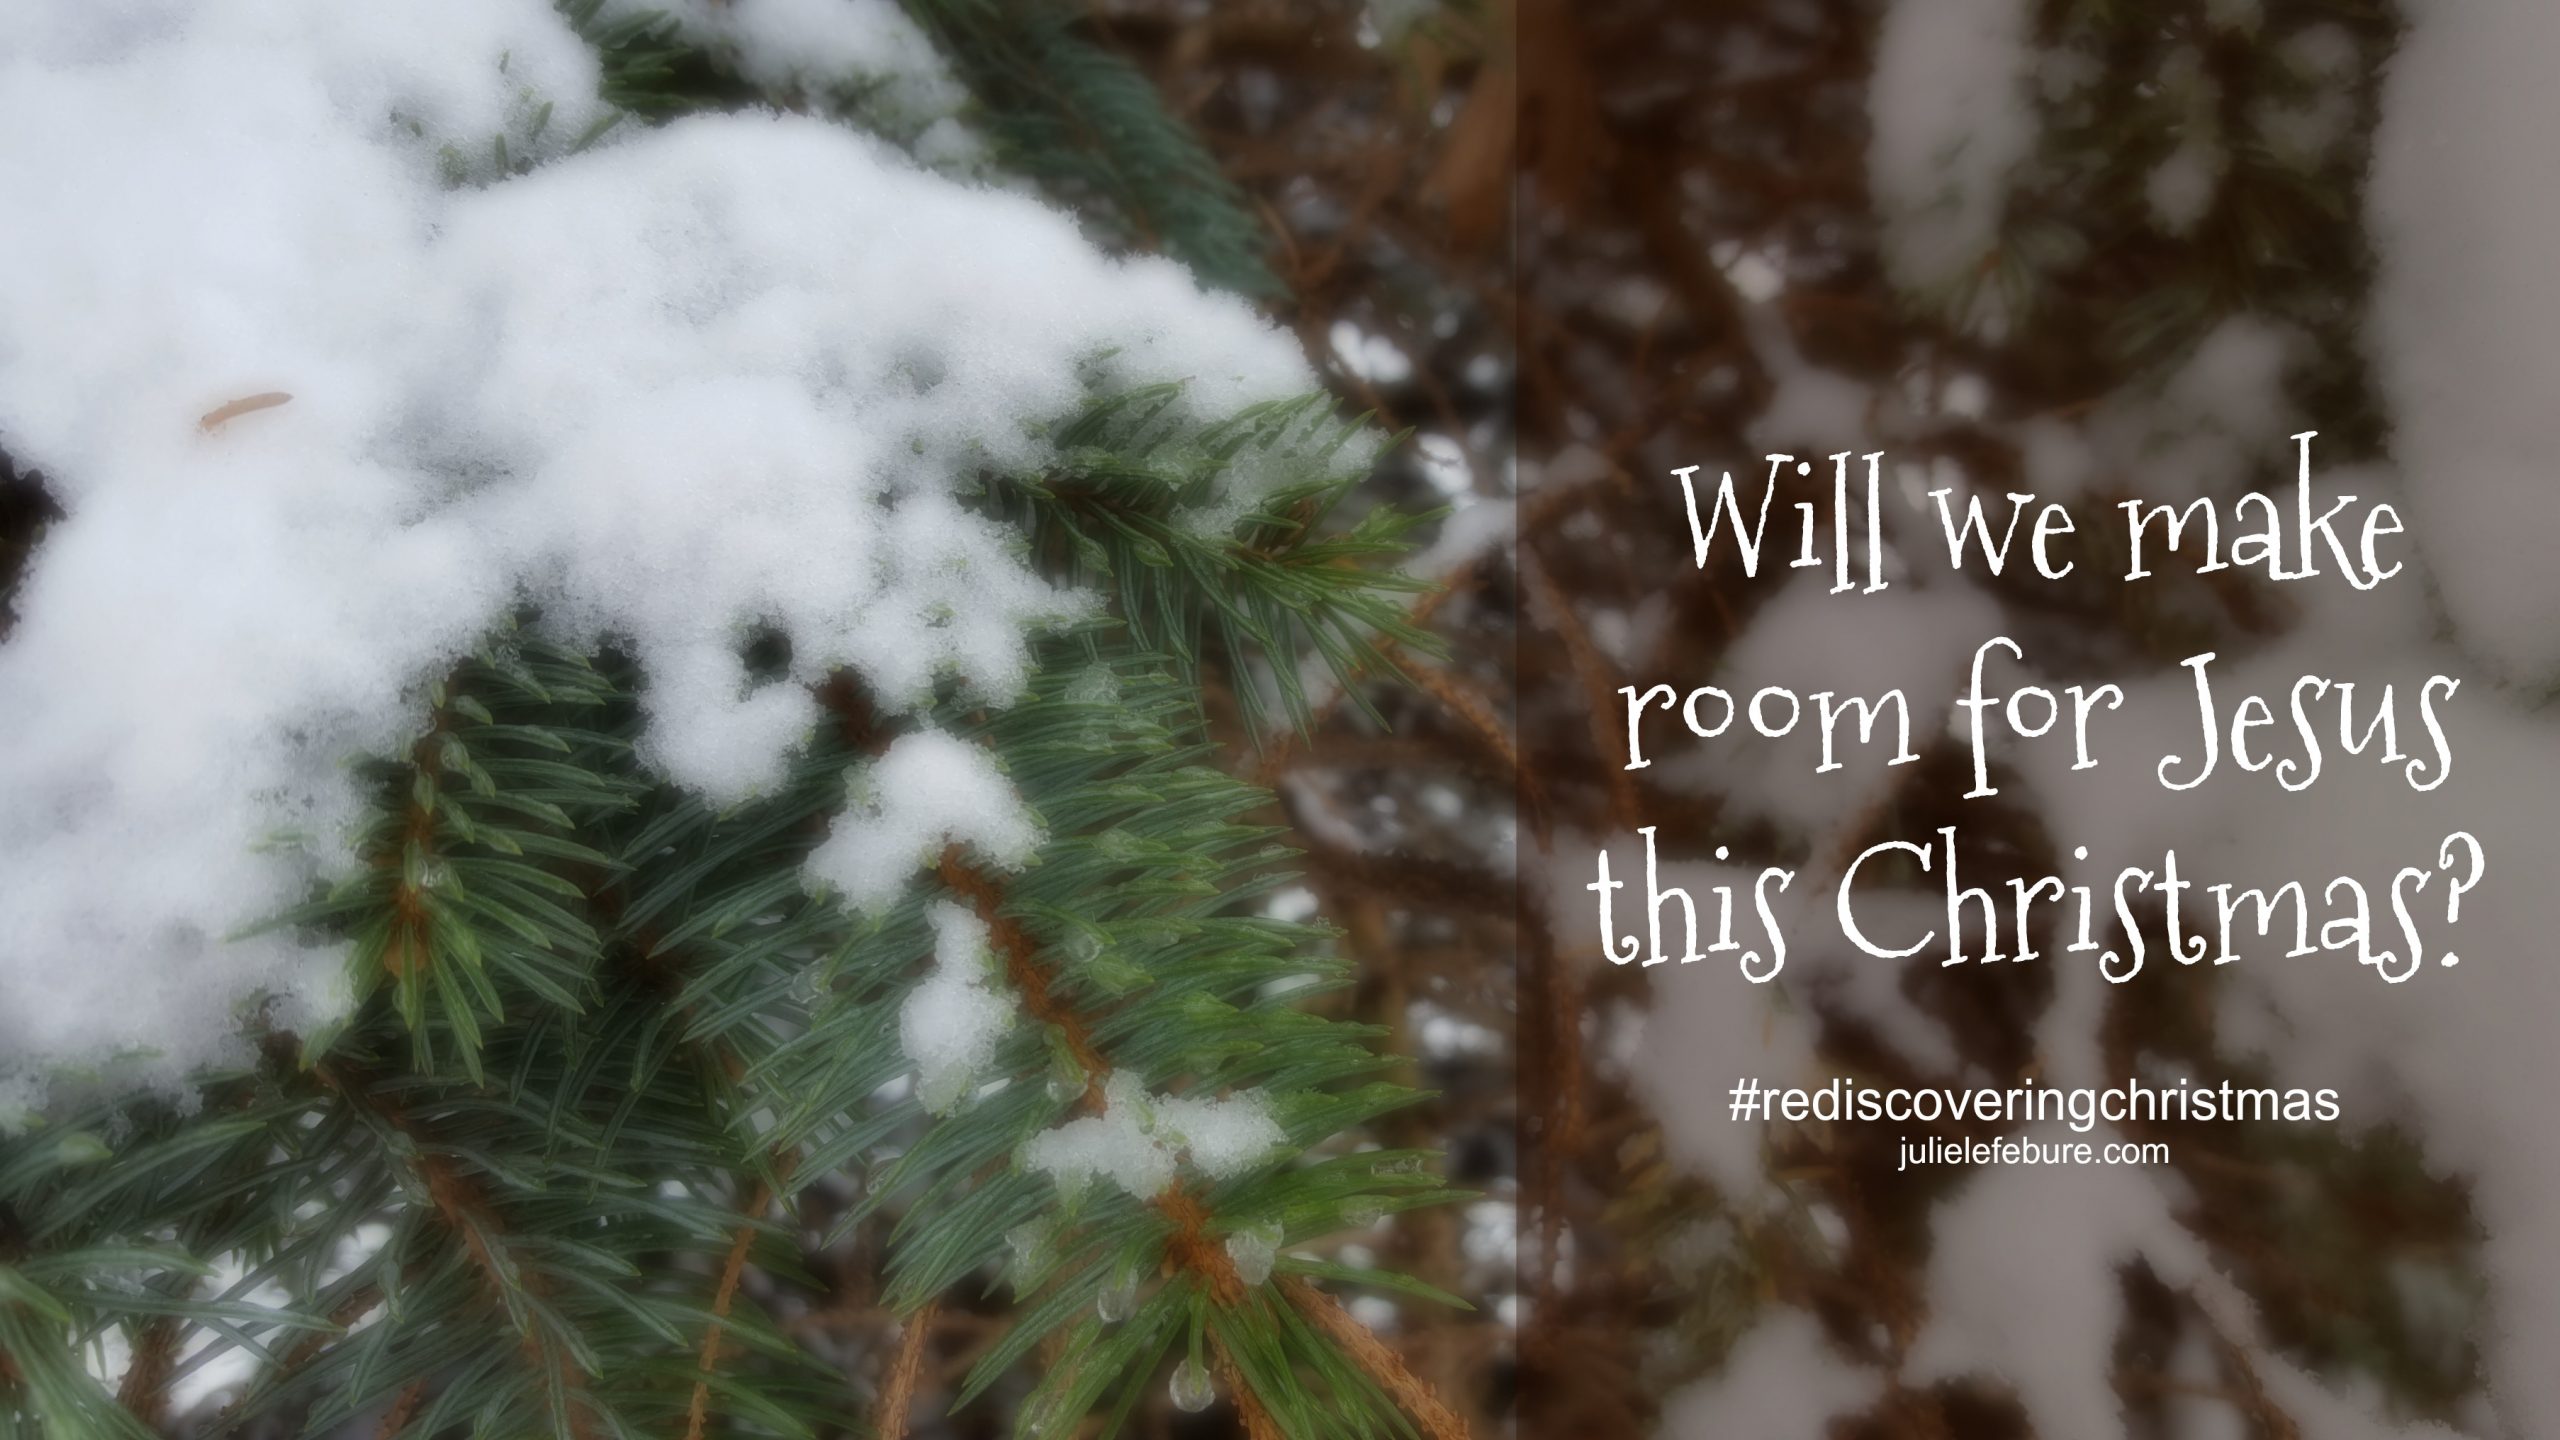 Rediscovering Christmas – Will We Make Room?